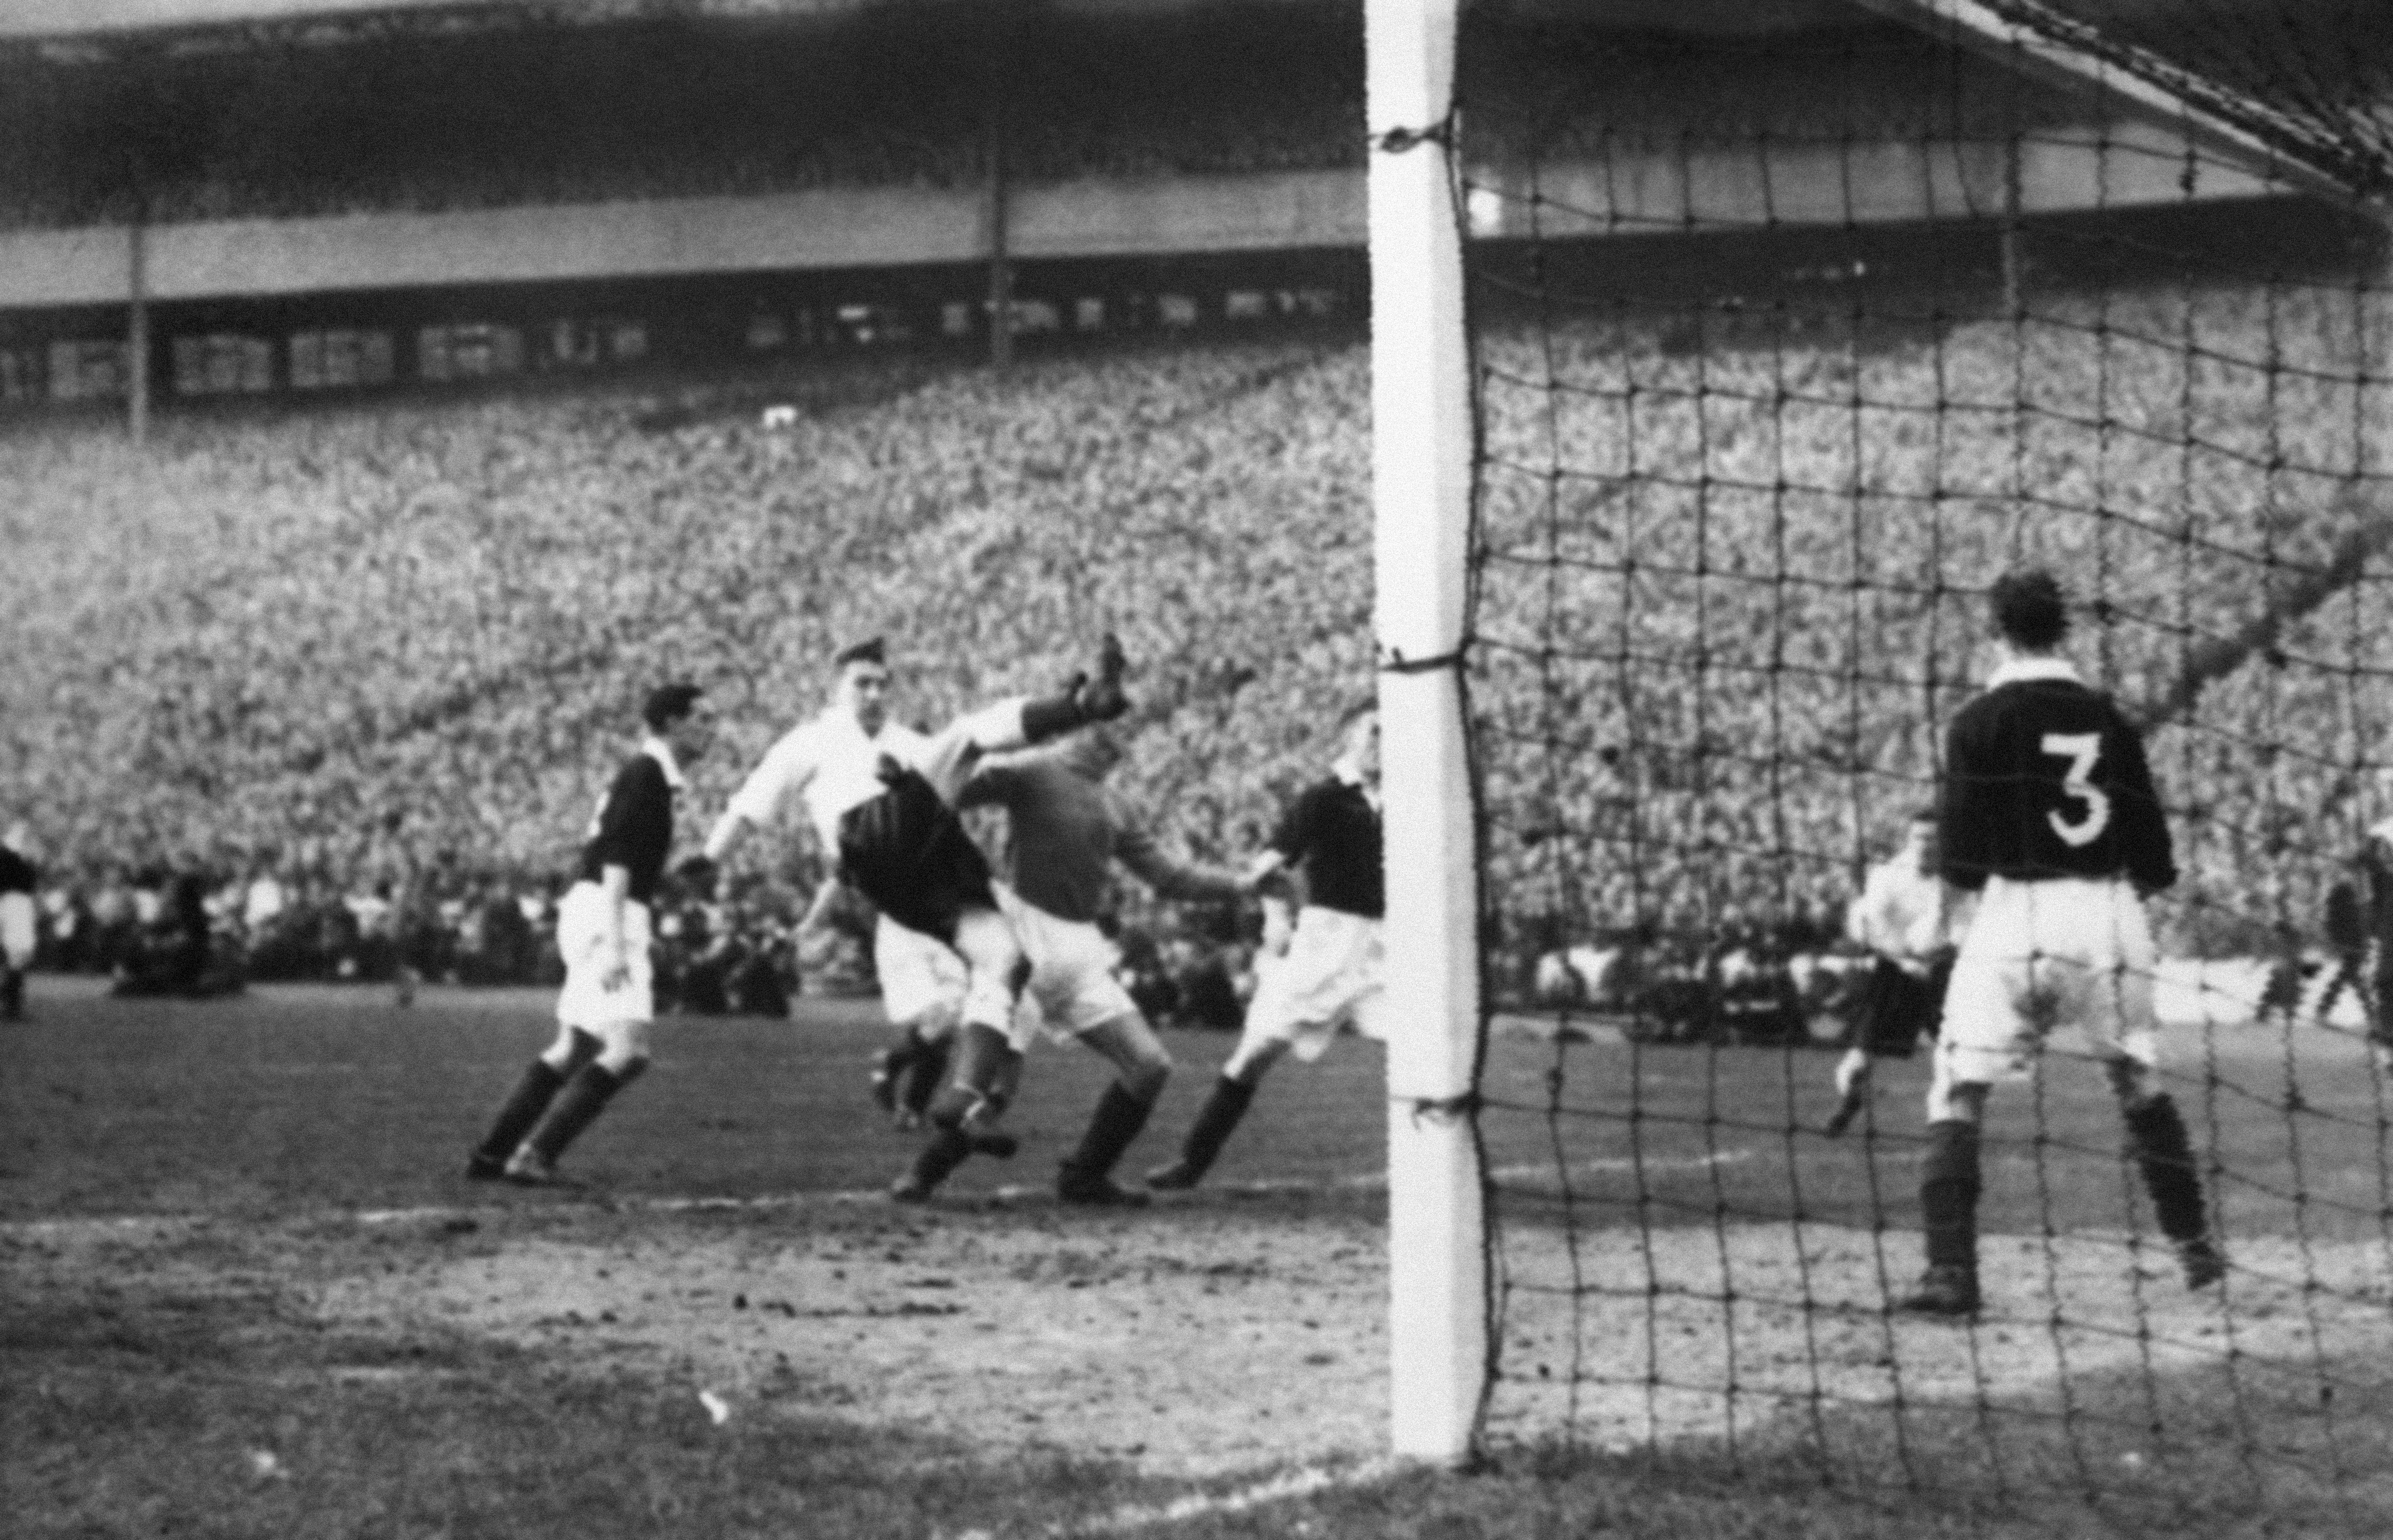 Scotland and England compete against one another at the 1949/50 British Home Championship